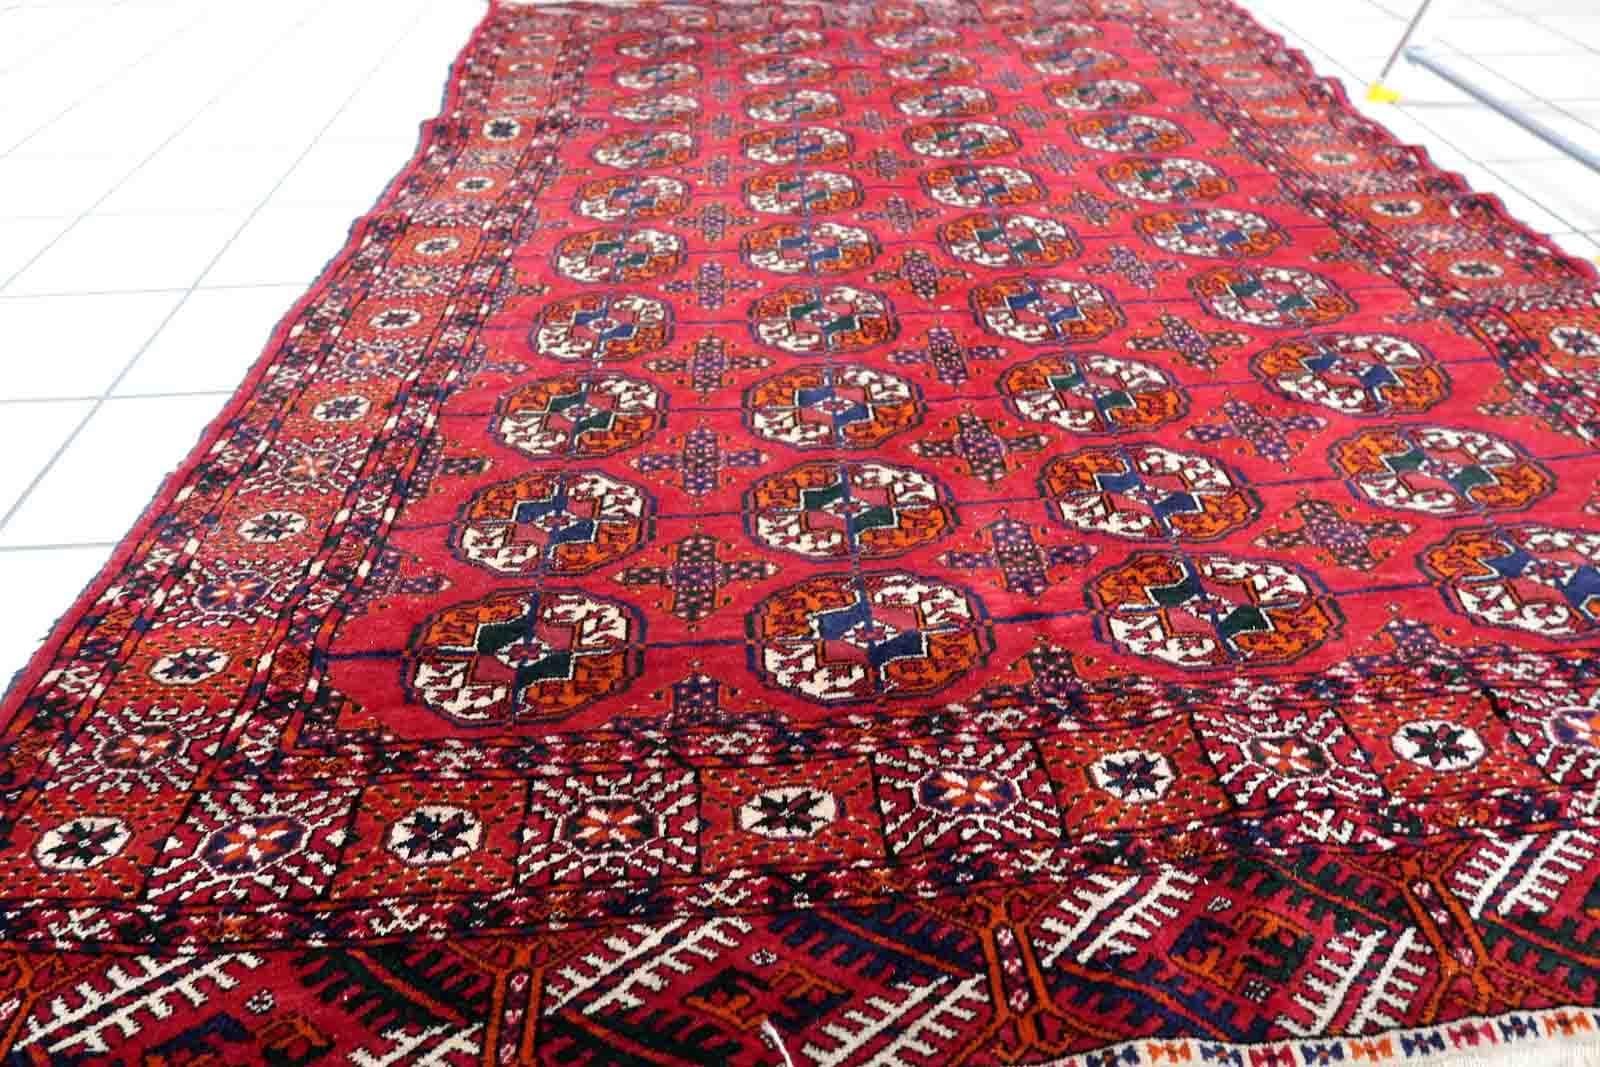 Handmade vintage Turkmen Tekke rug in wool and traditional design. The rug is from the end of 20th century in original good condition. The sides of the rug are not even.

?-condition: original good,

-circa: 1960s,

-size: 4.1' x 6.1' (126cm x